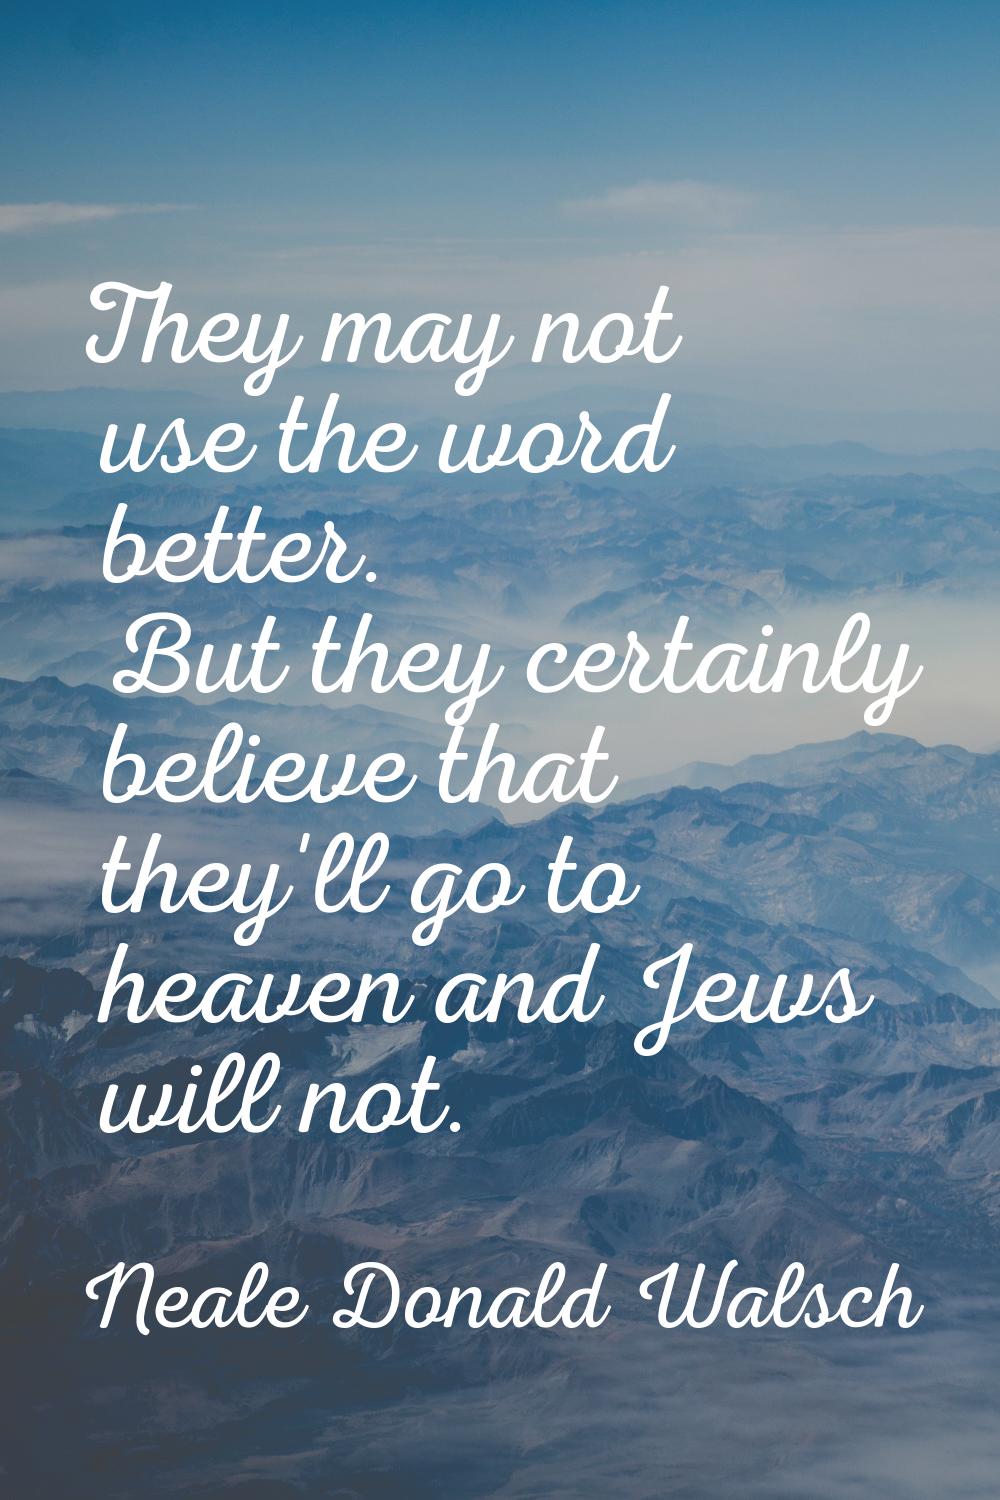 They may not use the word better. But they certainly believe that they'll go to heaven and Jews wil